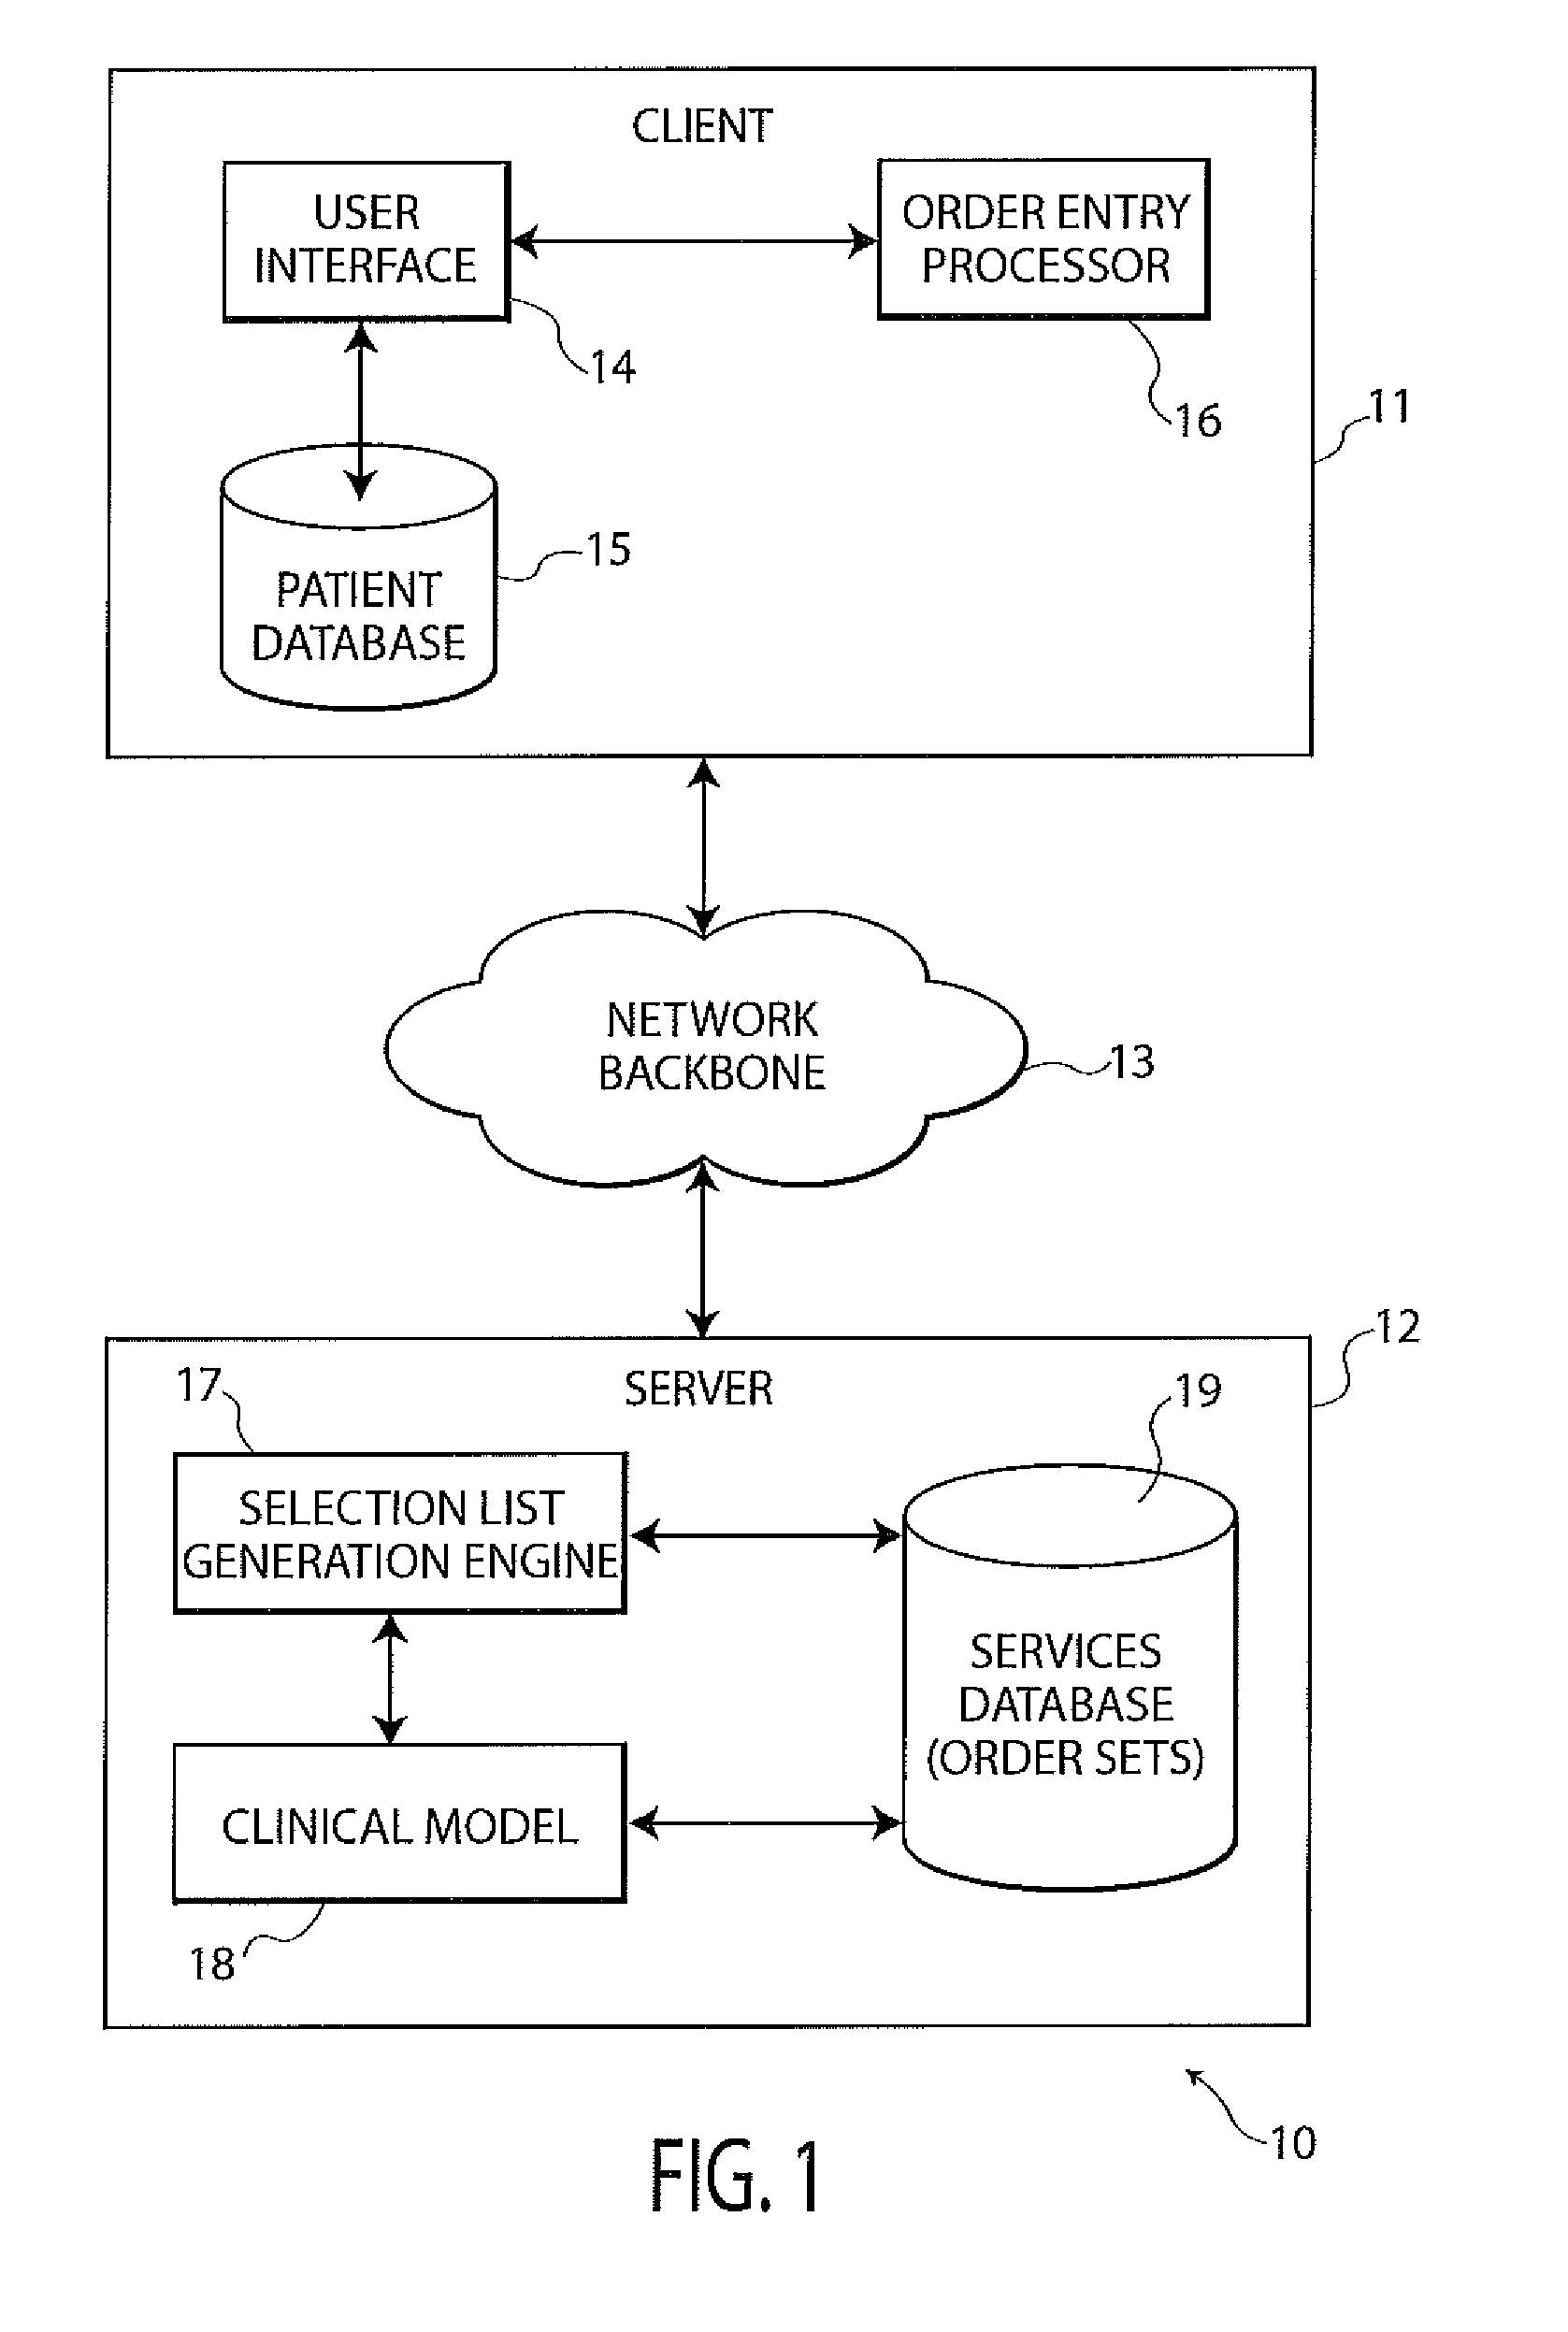 System and Method for Ordering Patient Specific Healthcare Services